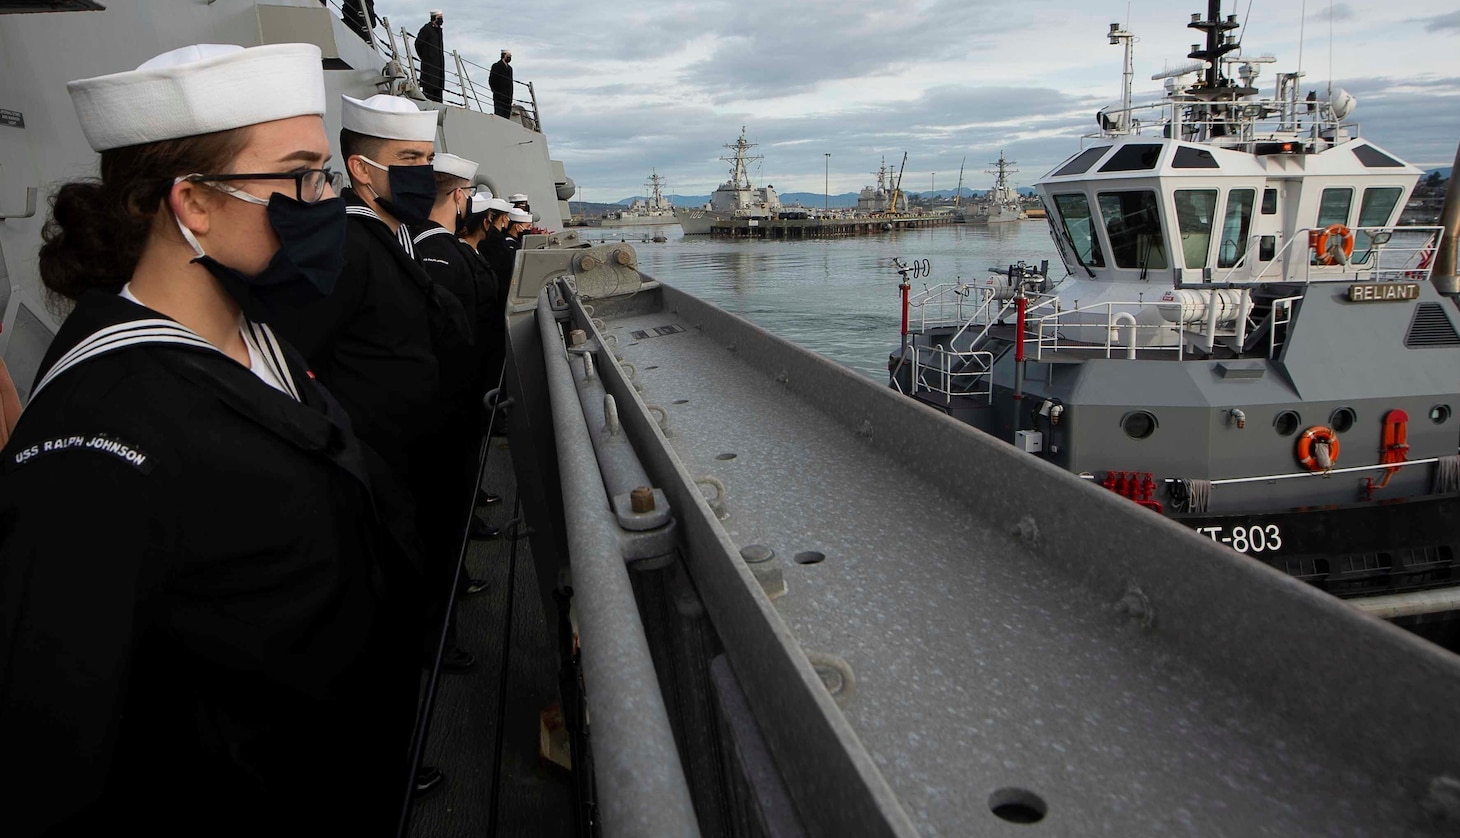 210114-N-FP334-1129 NAVAL STATION EVERETT, Wash. (Jan. 14, 2020) Sailors assigned to the Arleigh Burke-class guided-missile destroyer USS Ralph Johnson (DDG 114) man the rails as the ship pulls into Naval Station Everett, Jan 14. Ralph Johnson returned following a successful deployment to the U.S. 5th Fleet and U.S. 7th Fleet area of operations, which included freedom of navigation operations and participation in Operation Inherent Resolve. (U.S. Navy photo by Mass Communication Specialist 3rd Class Anthony Collier)